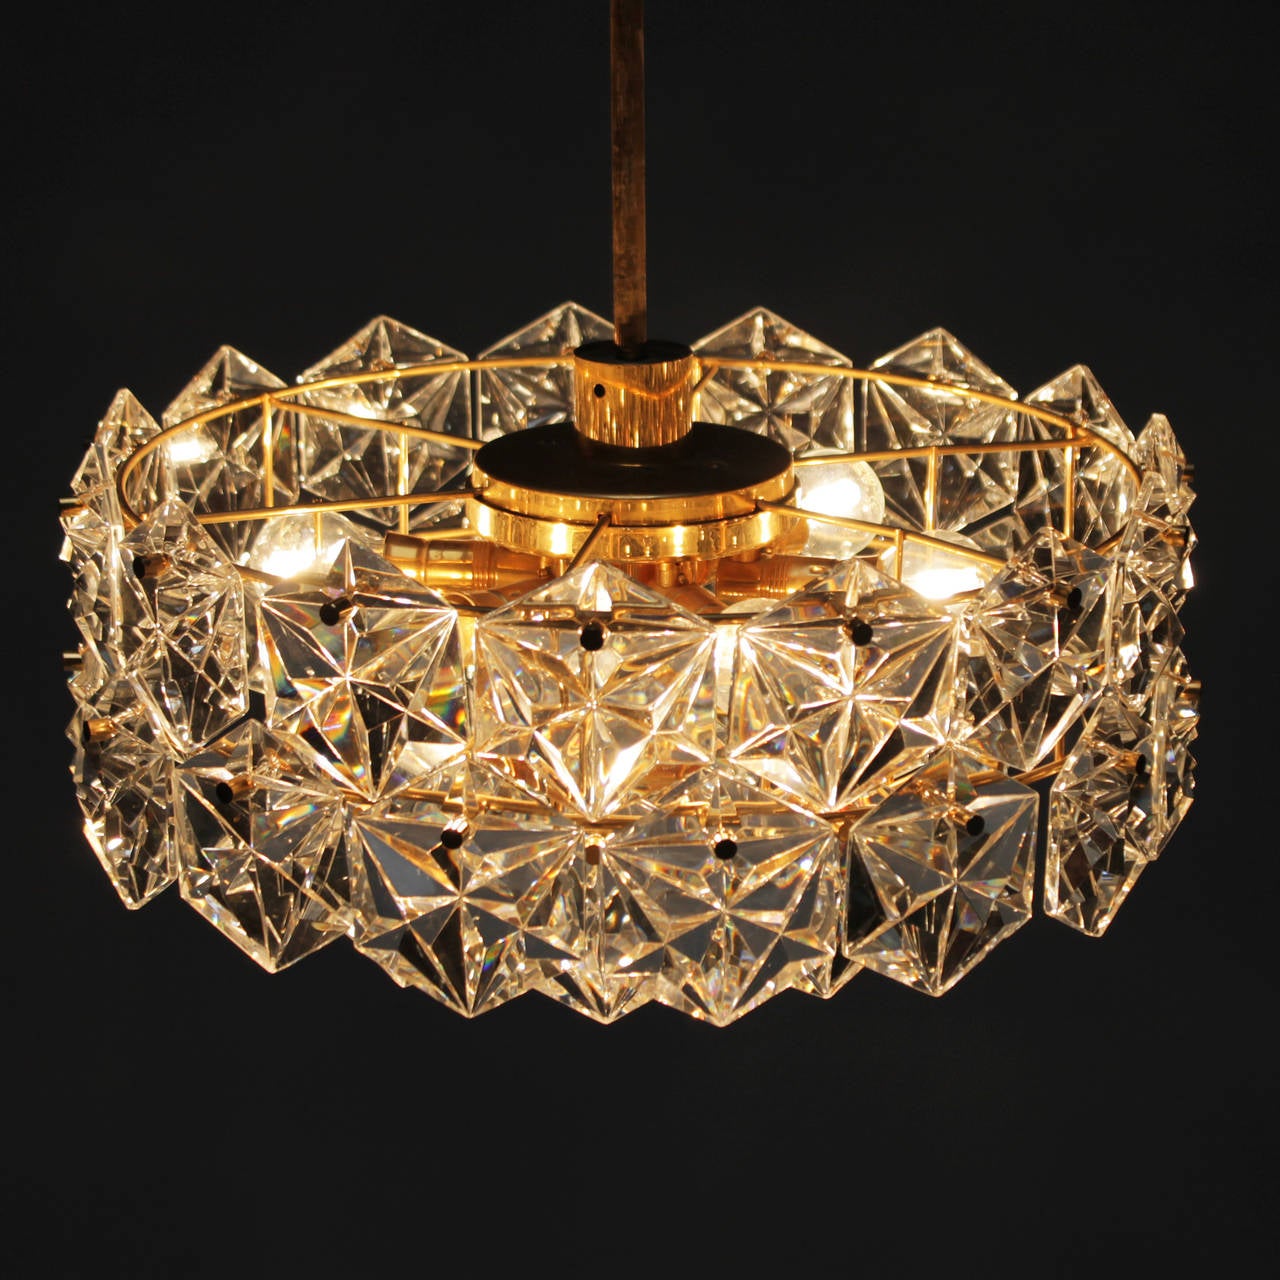 Late 20th Century Gold-Plated Kinkeldey Chandelier with Hexagonal Crystals